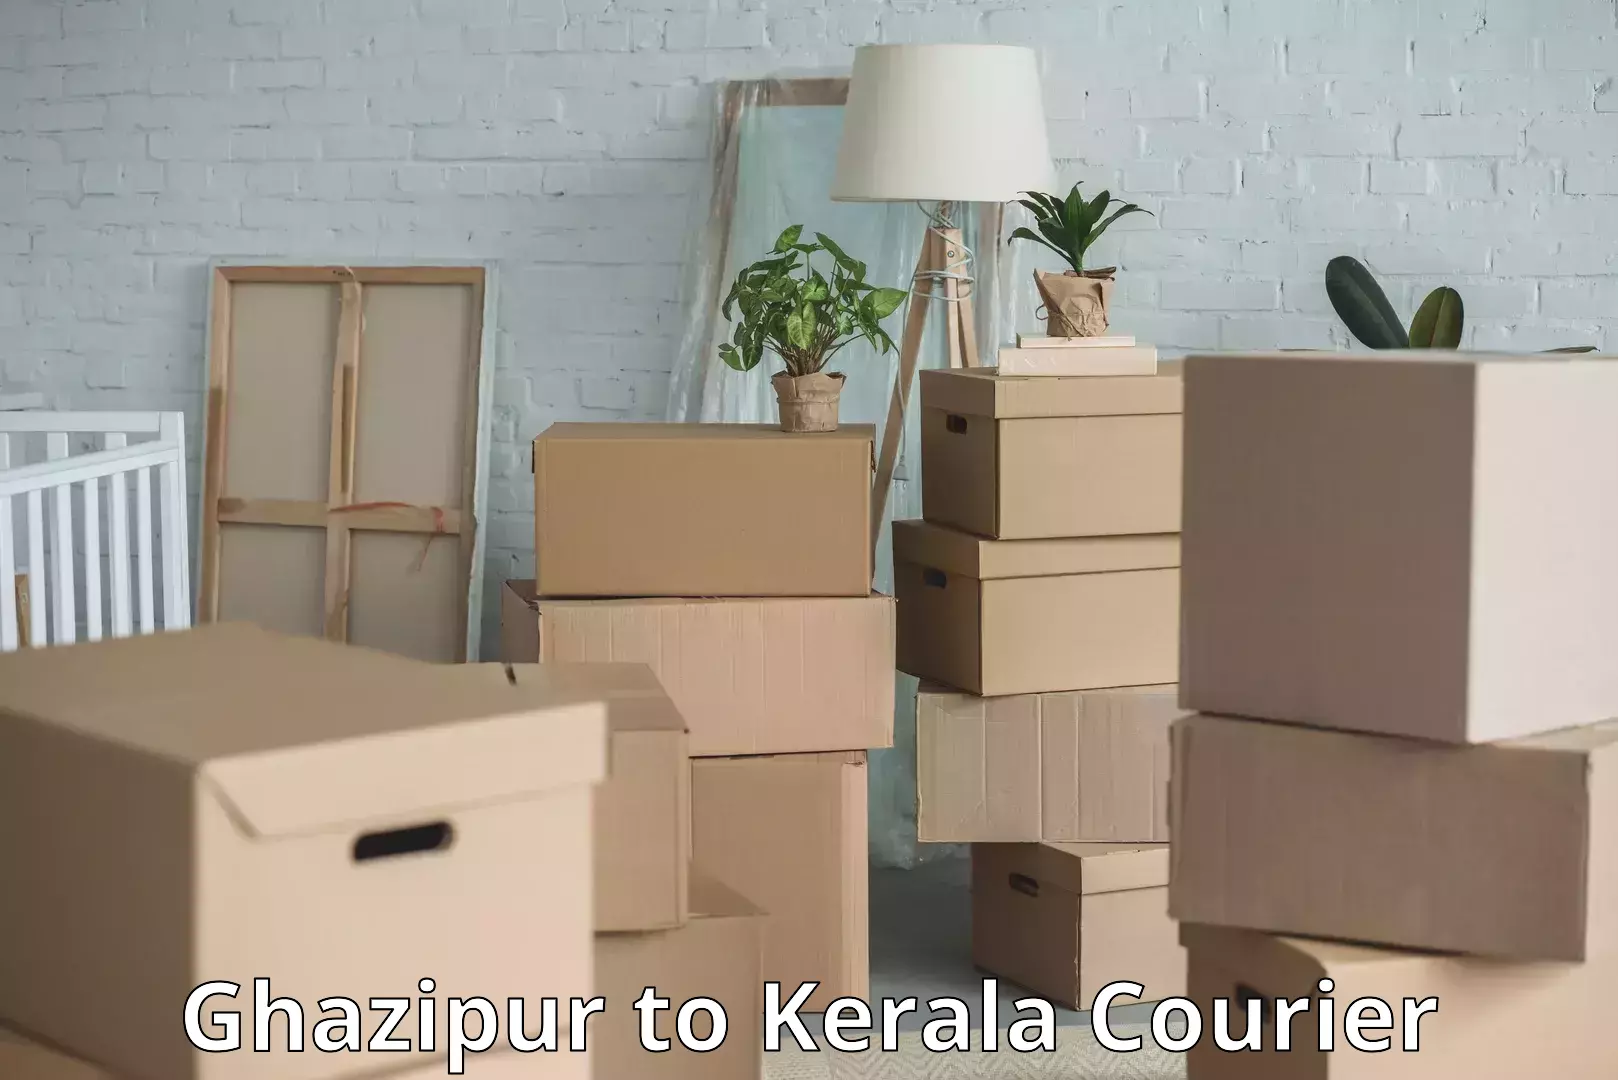 Luggage transport solutions Ghazipur to Kerala